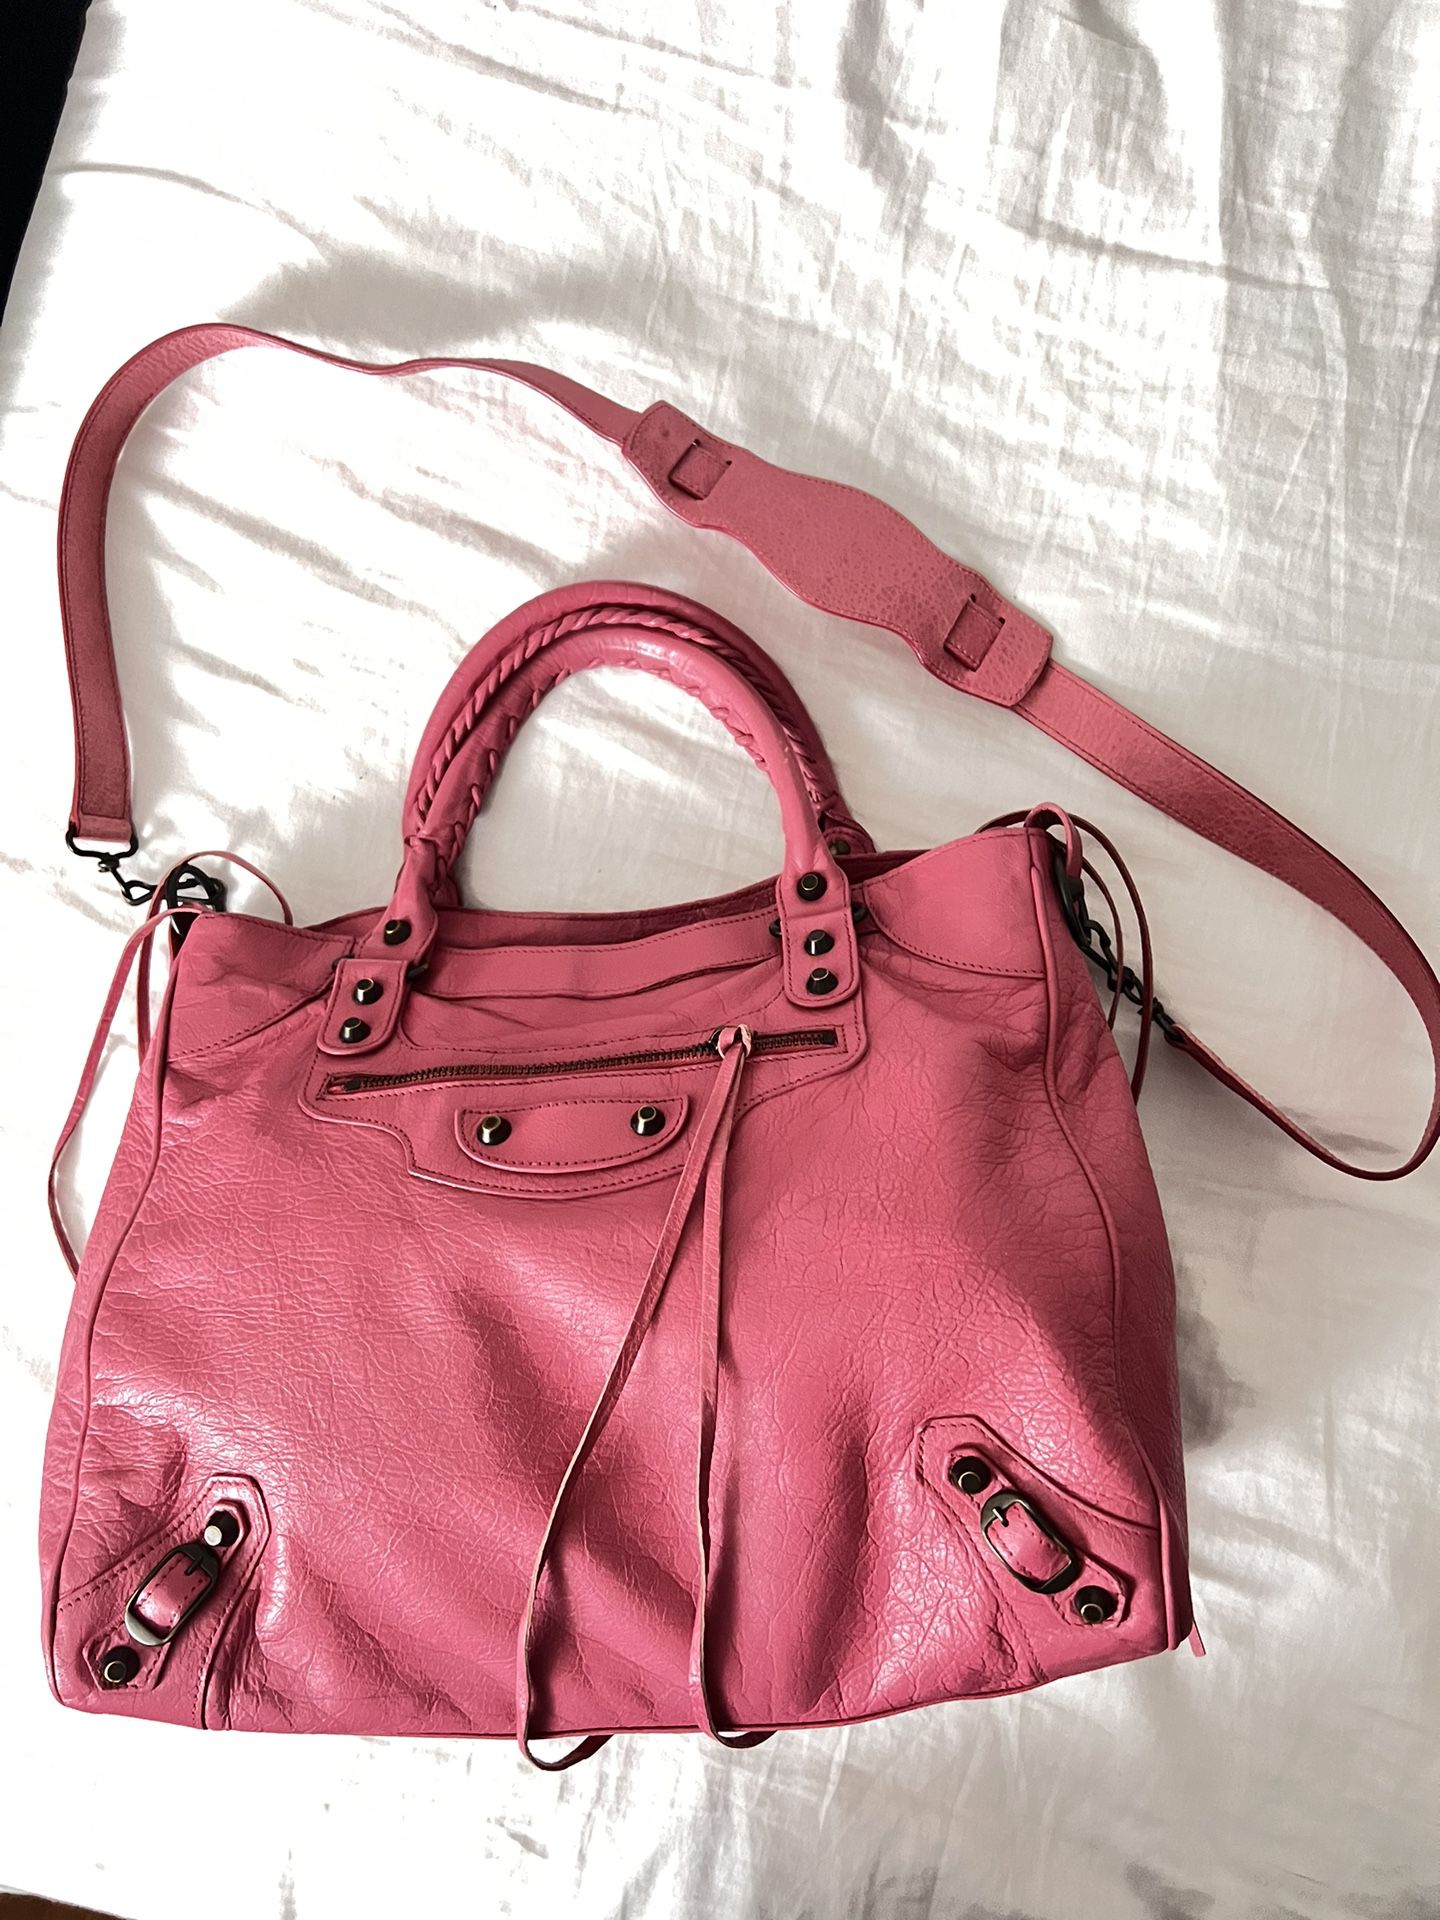 AUTHENTIC Balenciaga Pink Leather Bag